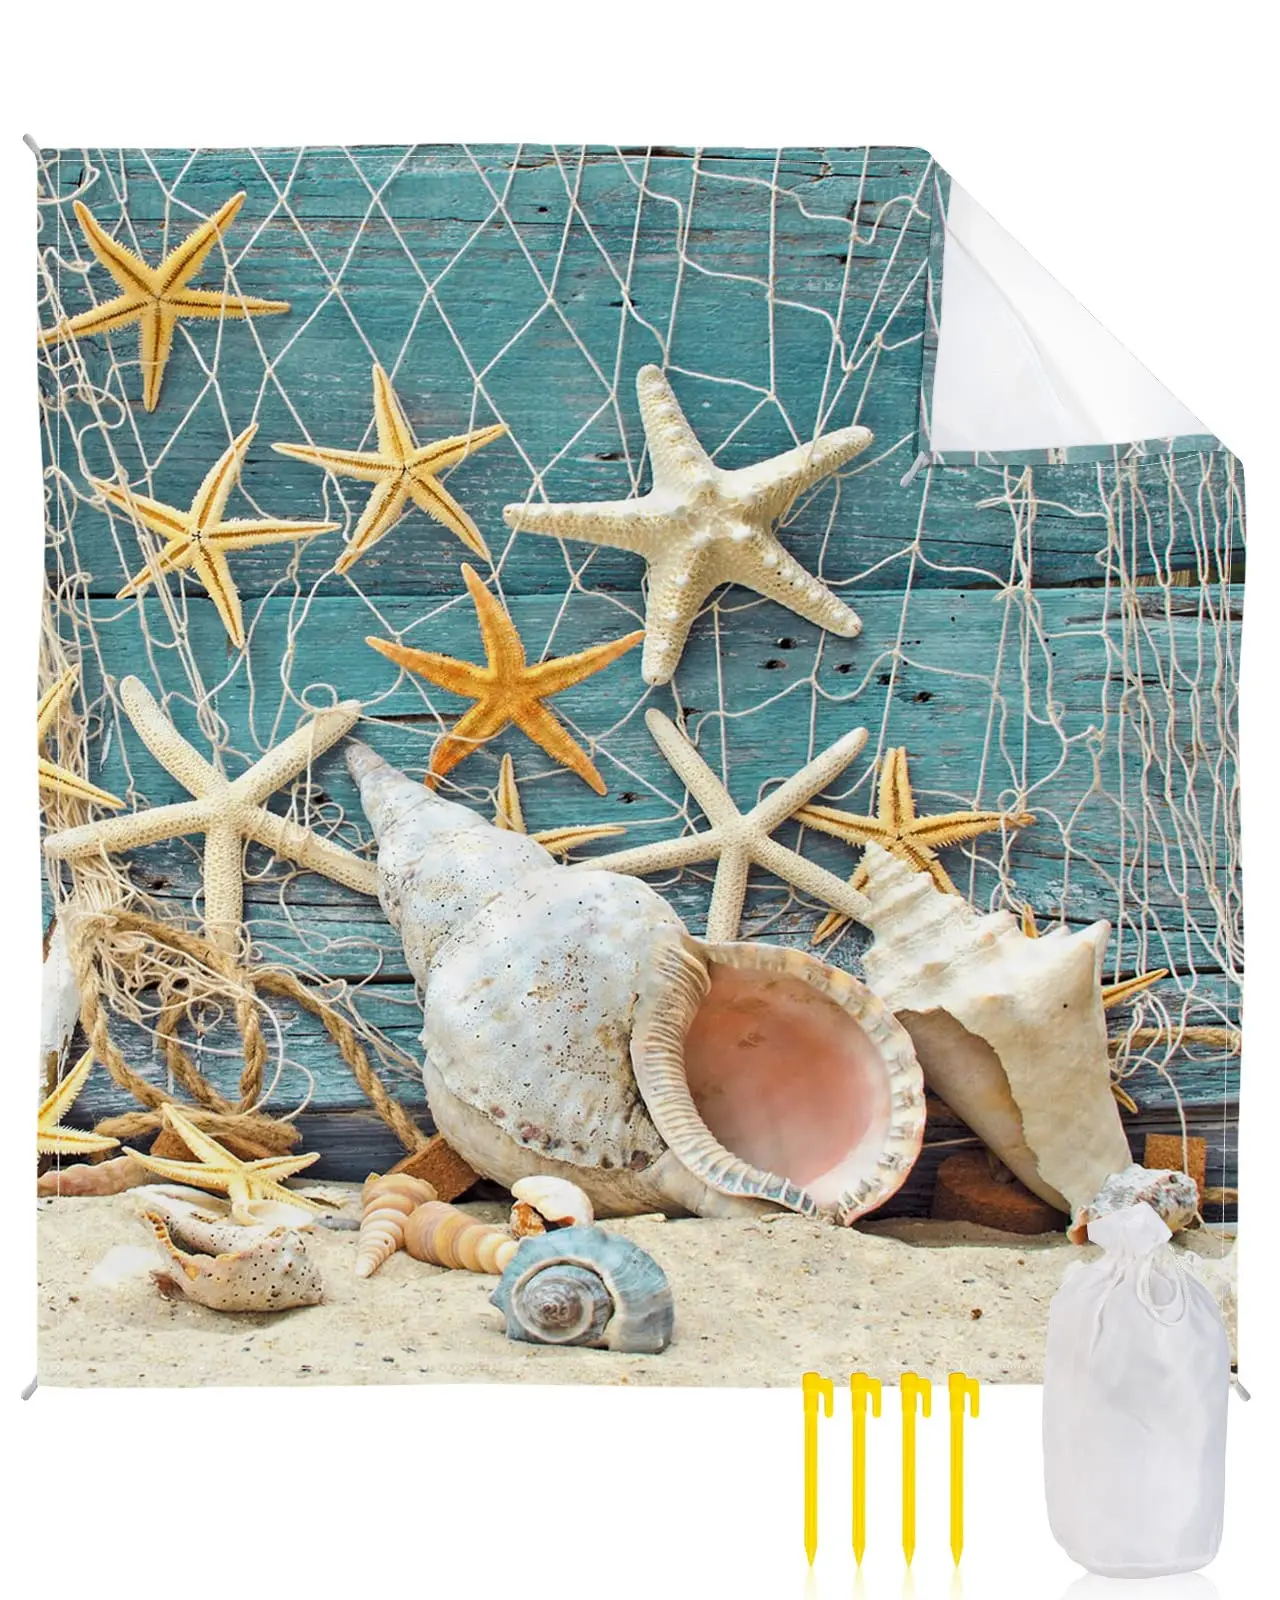 

Beach Blanket,Seashell Conch Starfish Sandproof Waterproof Foldable Beach Blankets for Camping,Grass,Beach with Friends Ocean